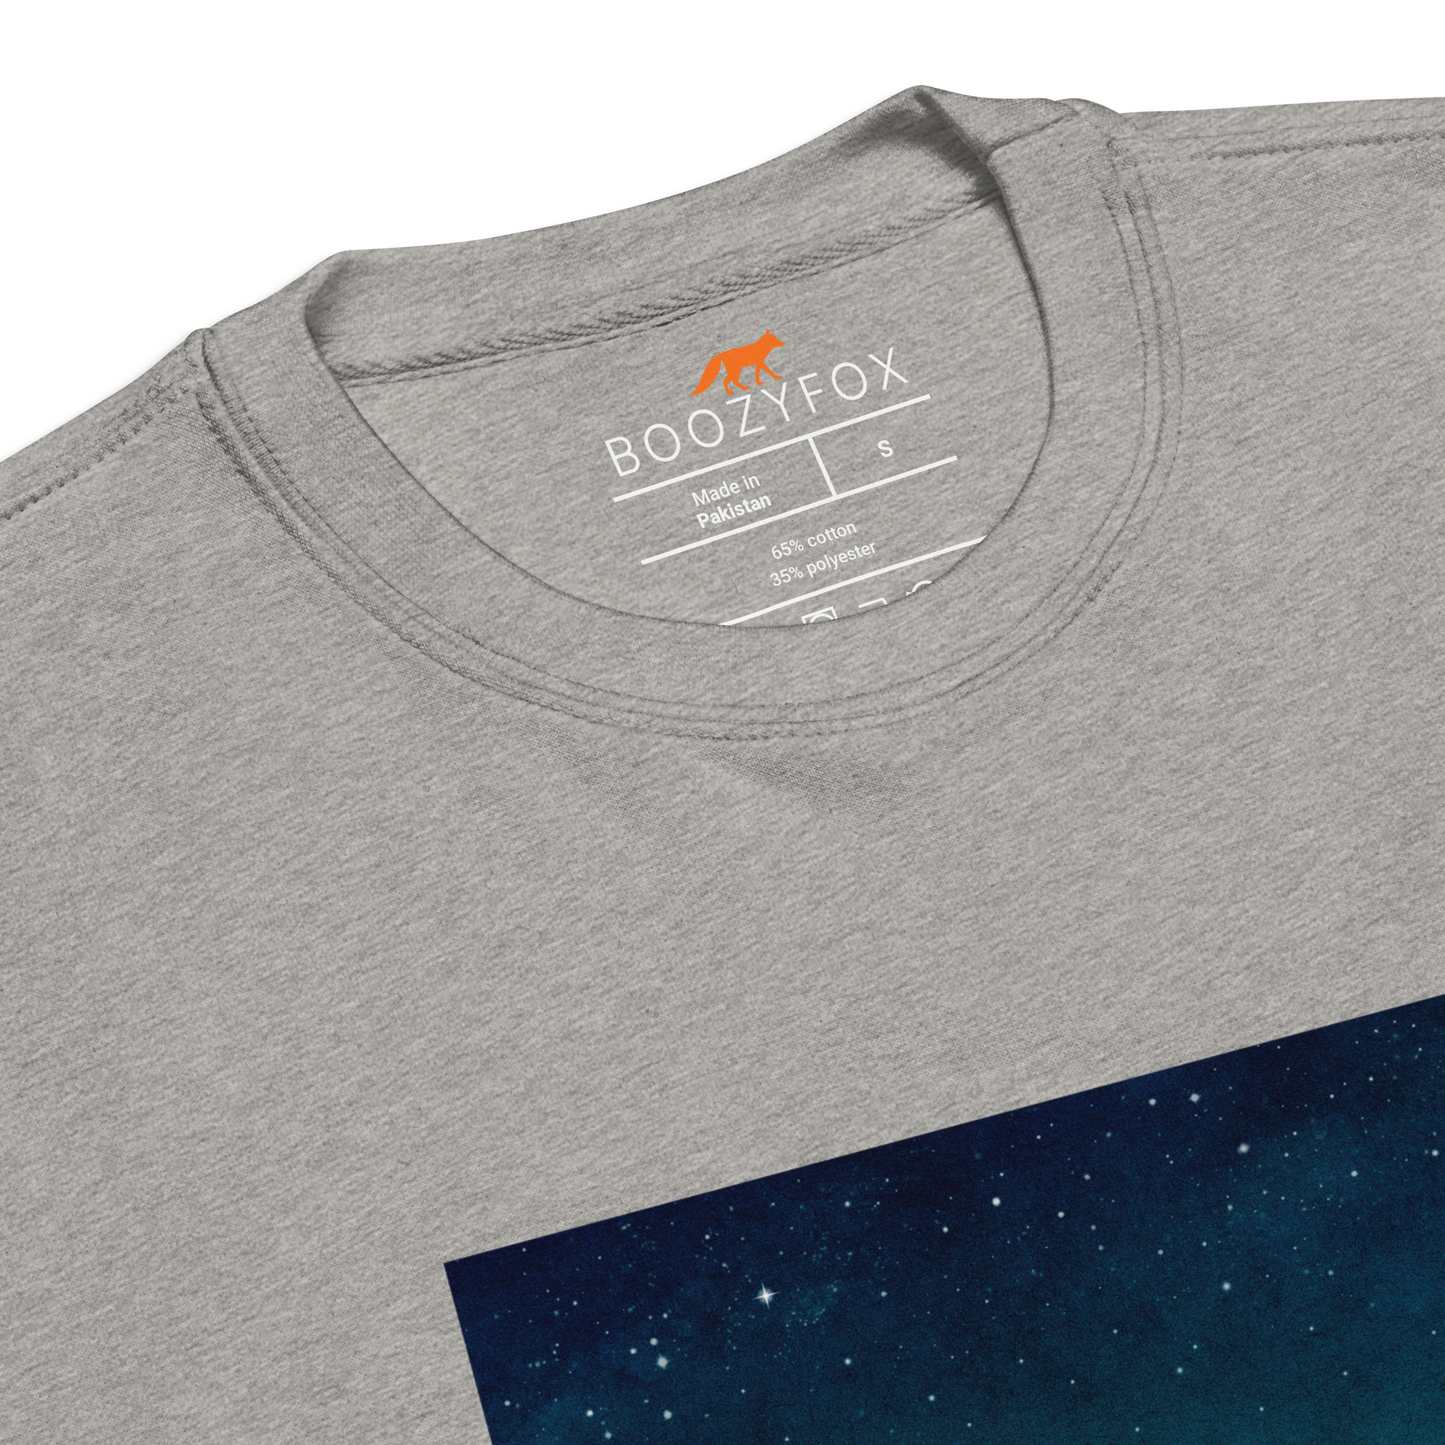 Product details of a Carbon Grey Premium Whale Sweatshirt featuring a majestic Whale Under The Moon graphic on the chest - Cool Graphic Whale Sweatshirts - Boozy Fox